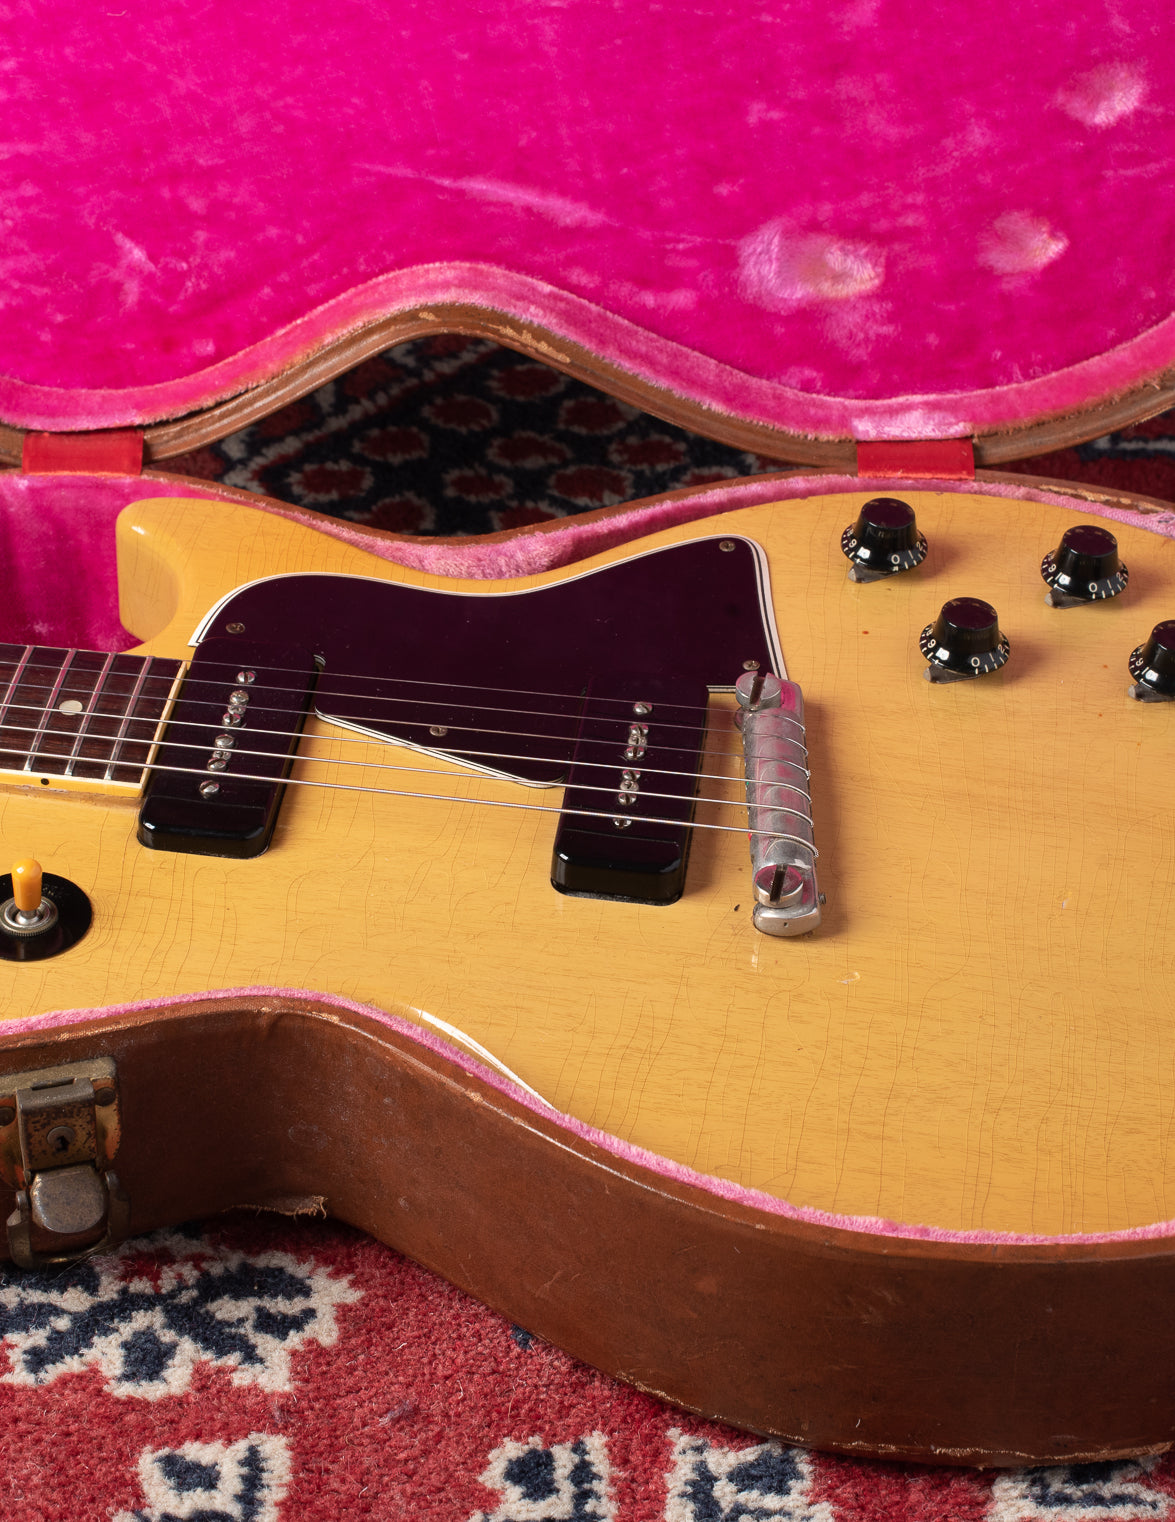 1956 Gibson Les Paul Special in pink and brown lifton case